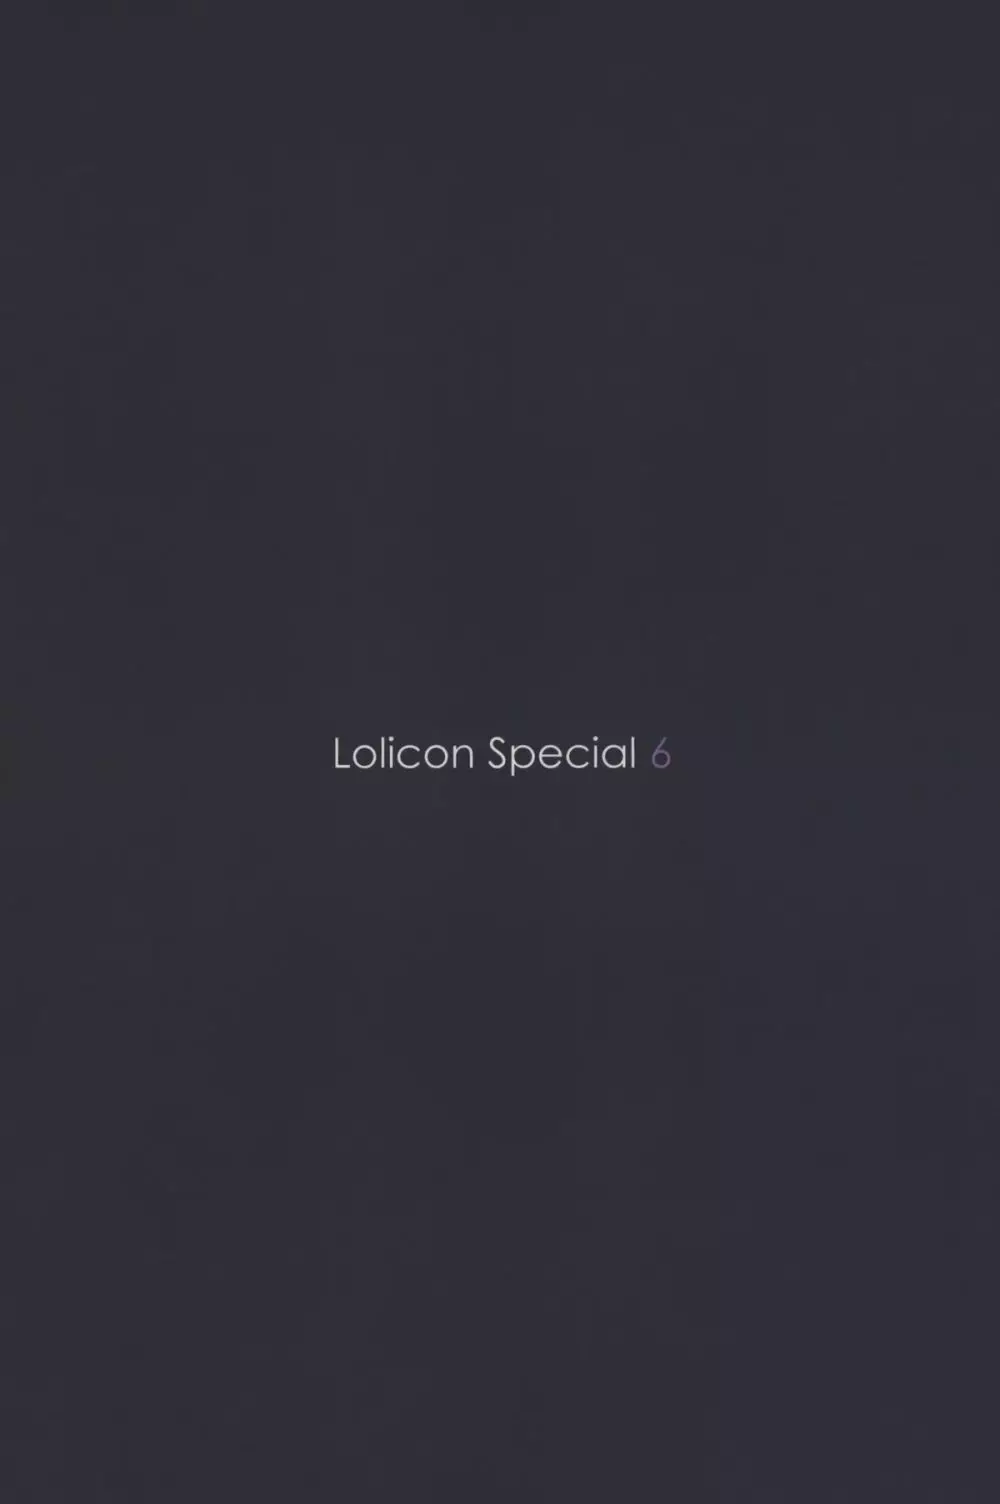 Lolicon Special 6 2ページ